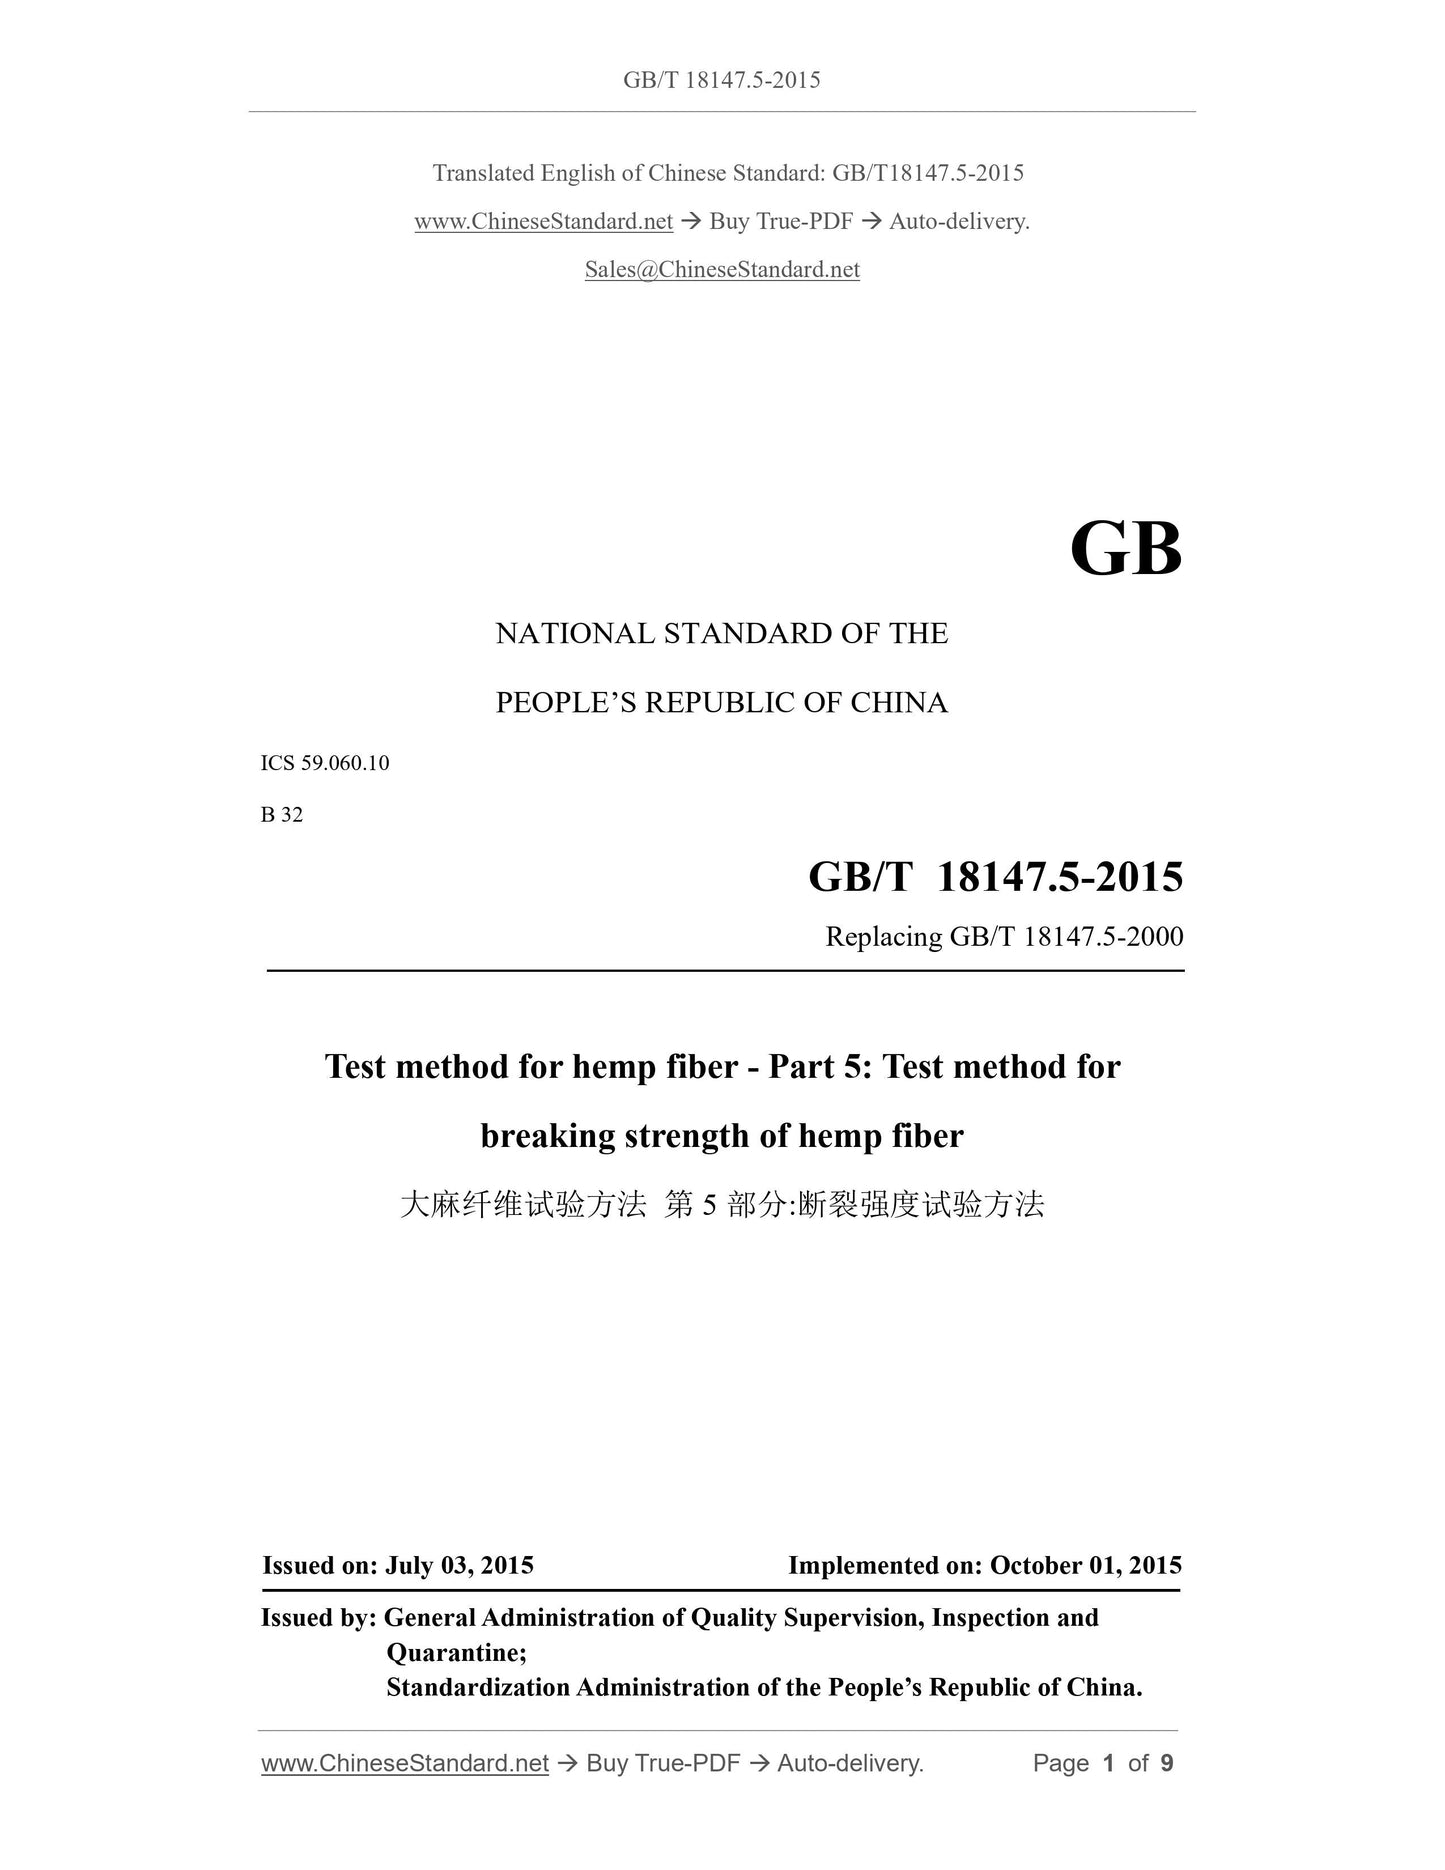 GB/T 18147.5-2015 Page 1